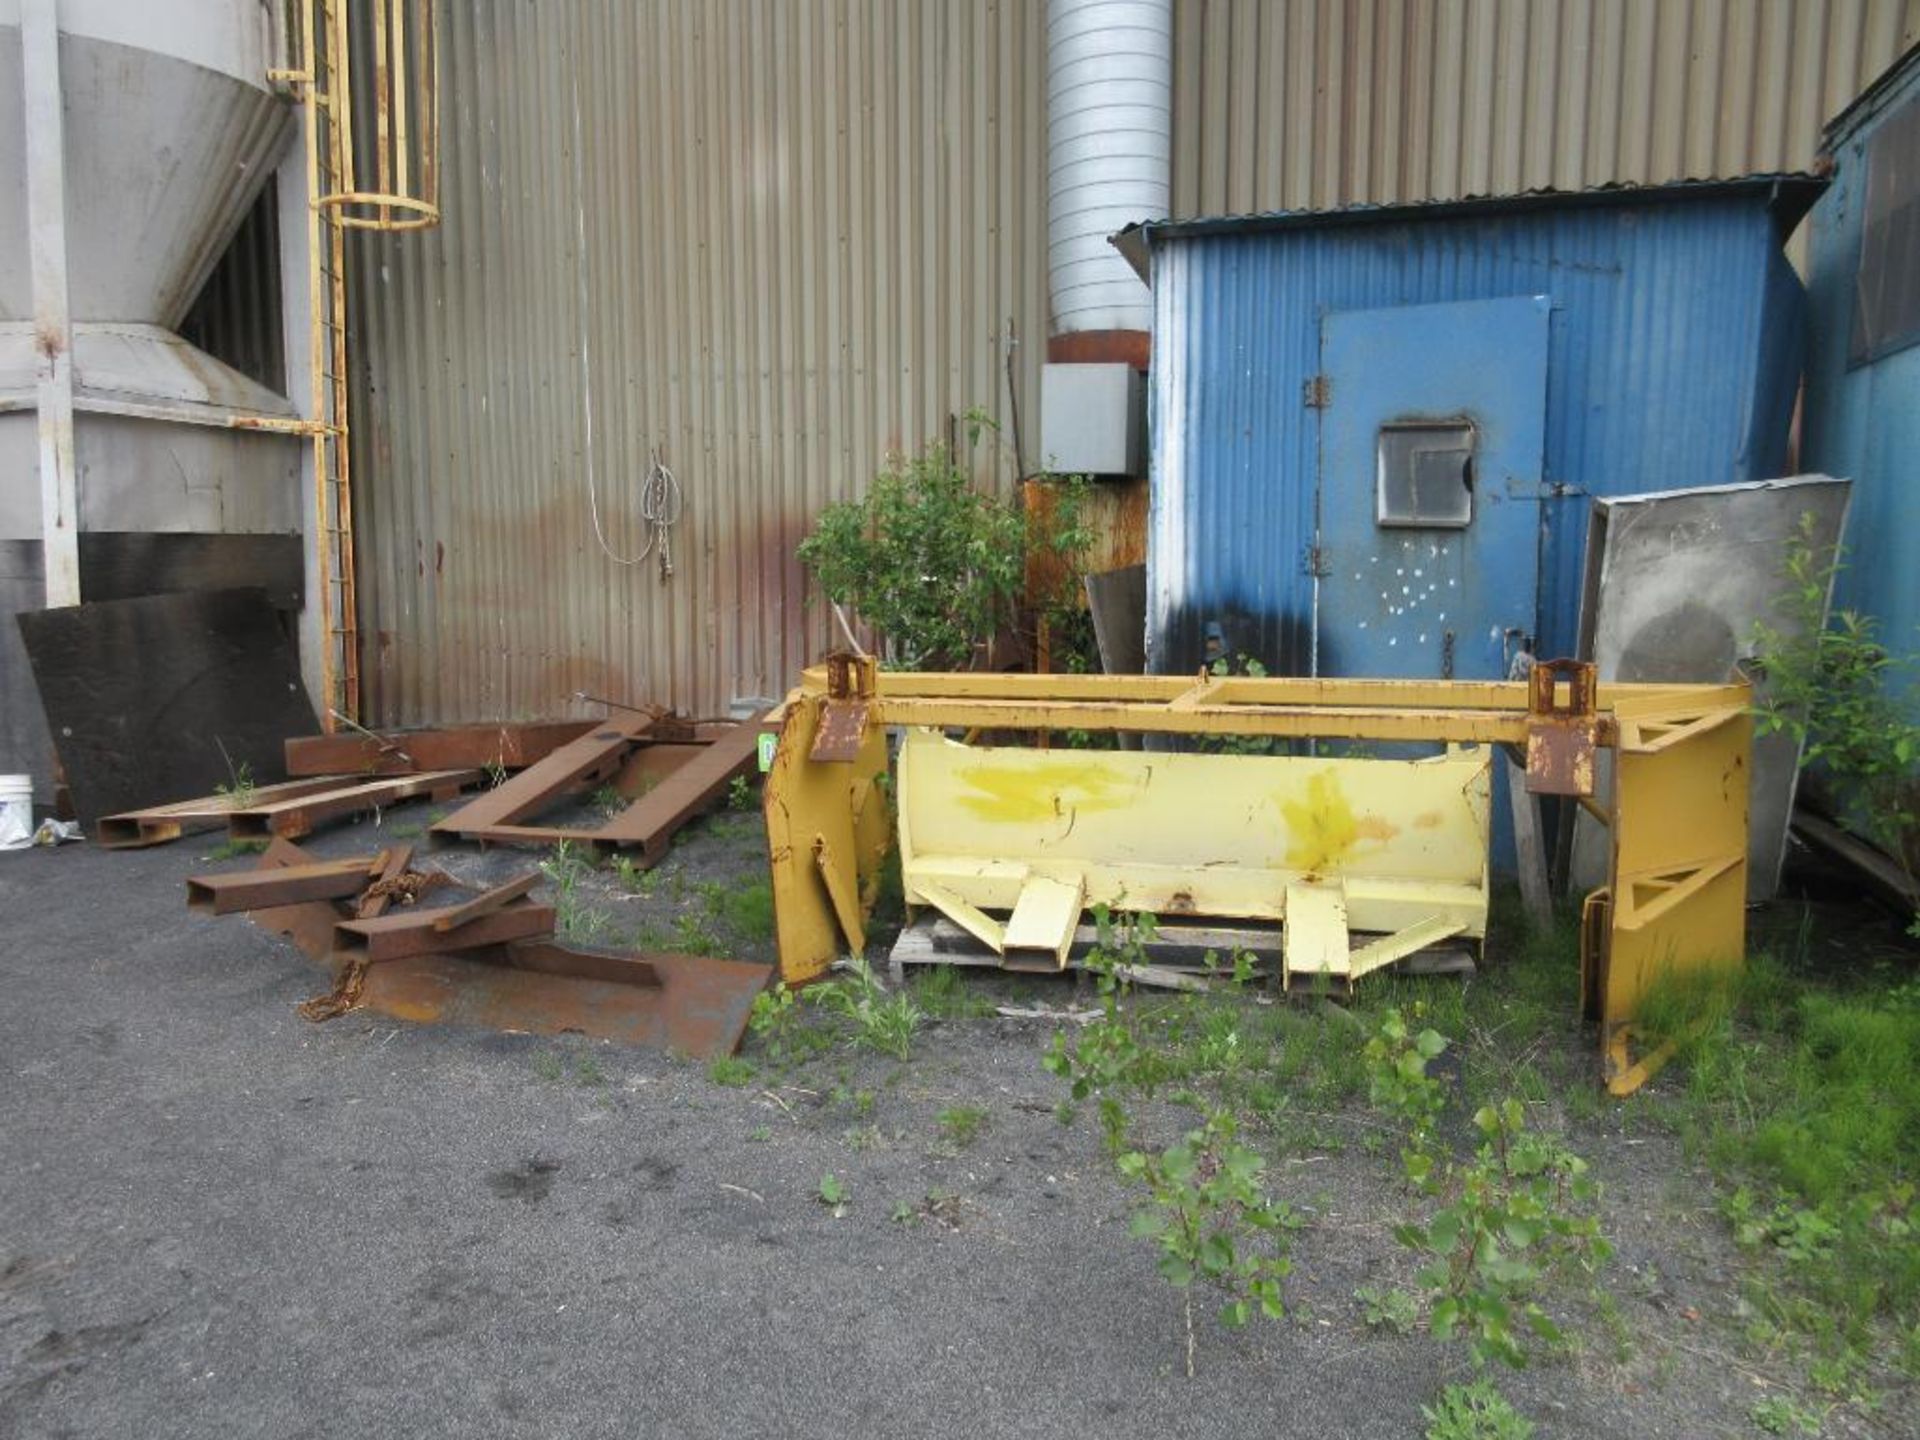 LOT OF 6 SNOW PLOUGH IBG.GRATING FOR TRUCK ATTACHMENTS (NORTH PAINT BLDG) - Image 8 of 14